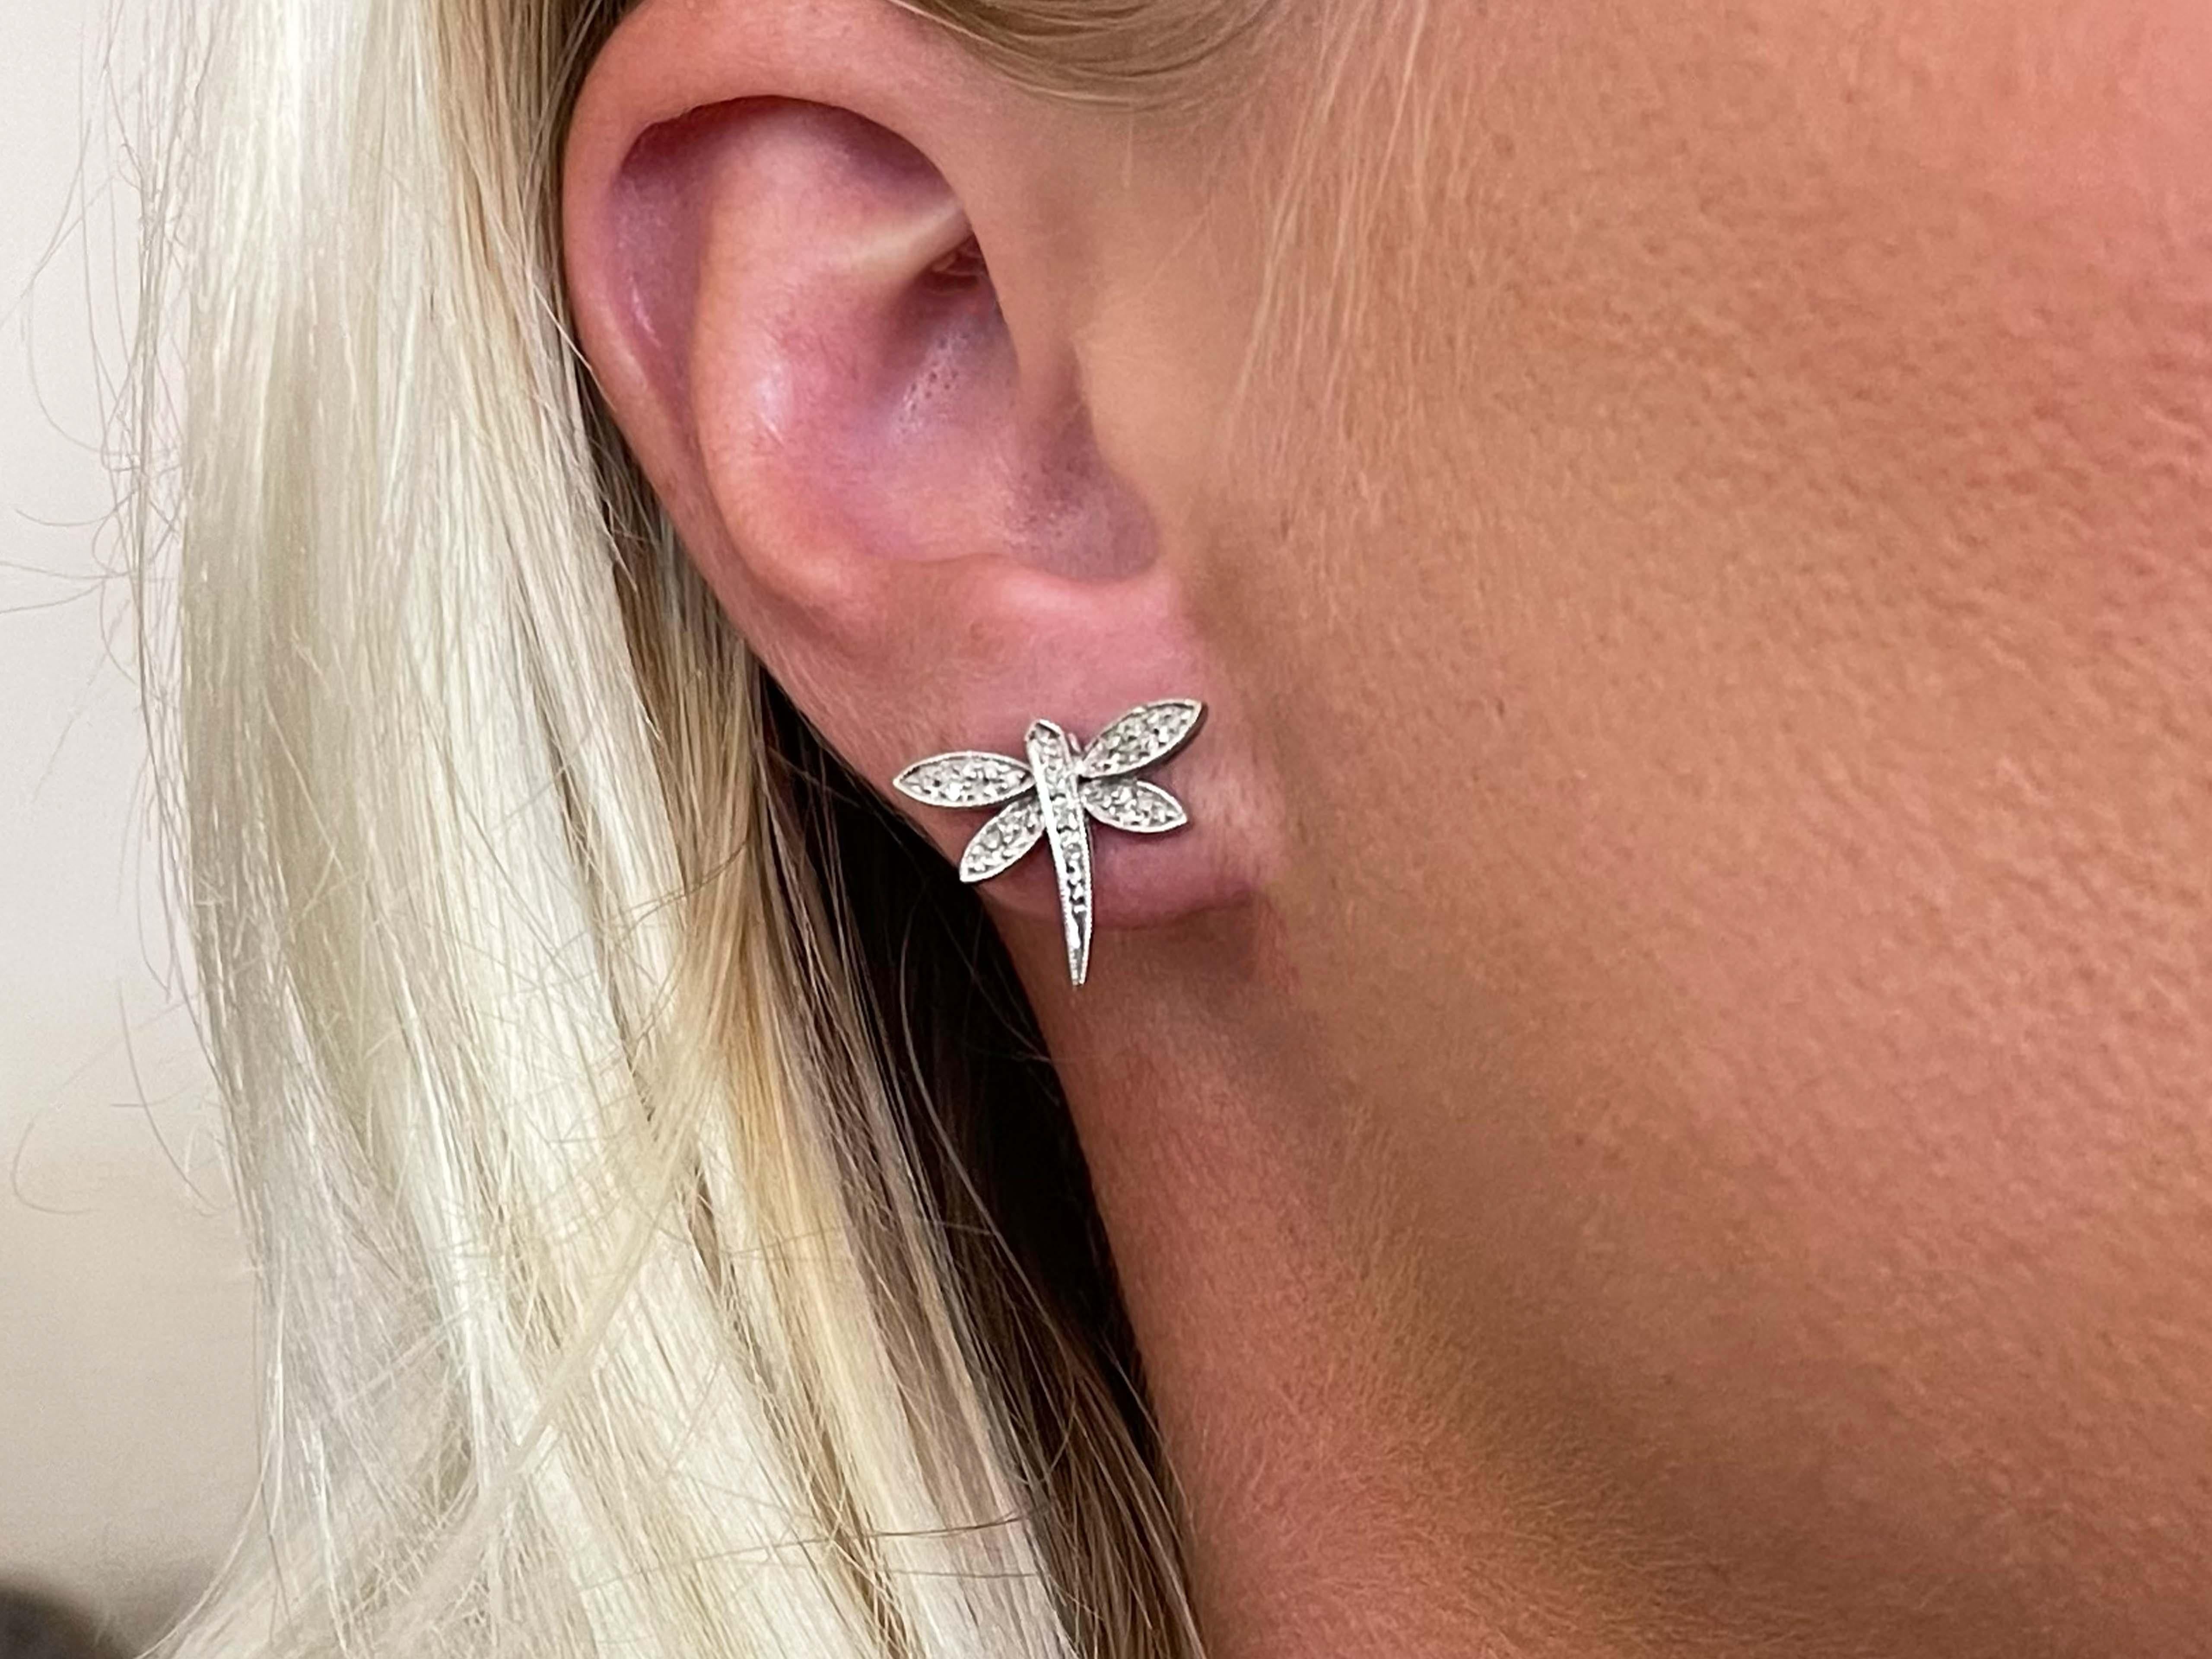 Matching necklace available for purchase

Item Specifications:

Metal: 14k White Gold

Total Weight: 2.6 Grams

Earring Diameter: 14 mm x 18 mm

Diamond Count: 56 round single cut diamonds

Diamond Carat Weight: ~0.15 carats

Diamond Clarity: